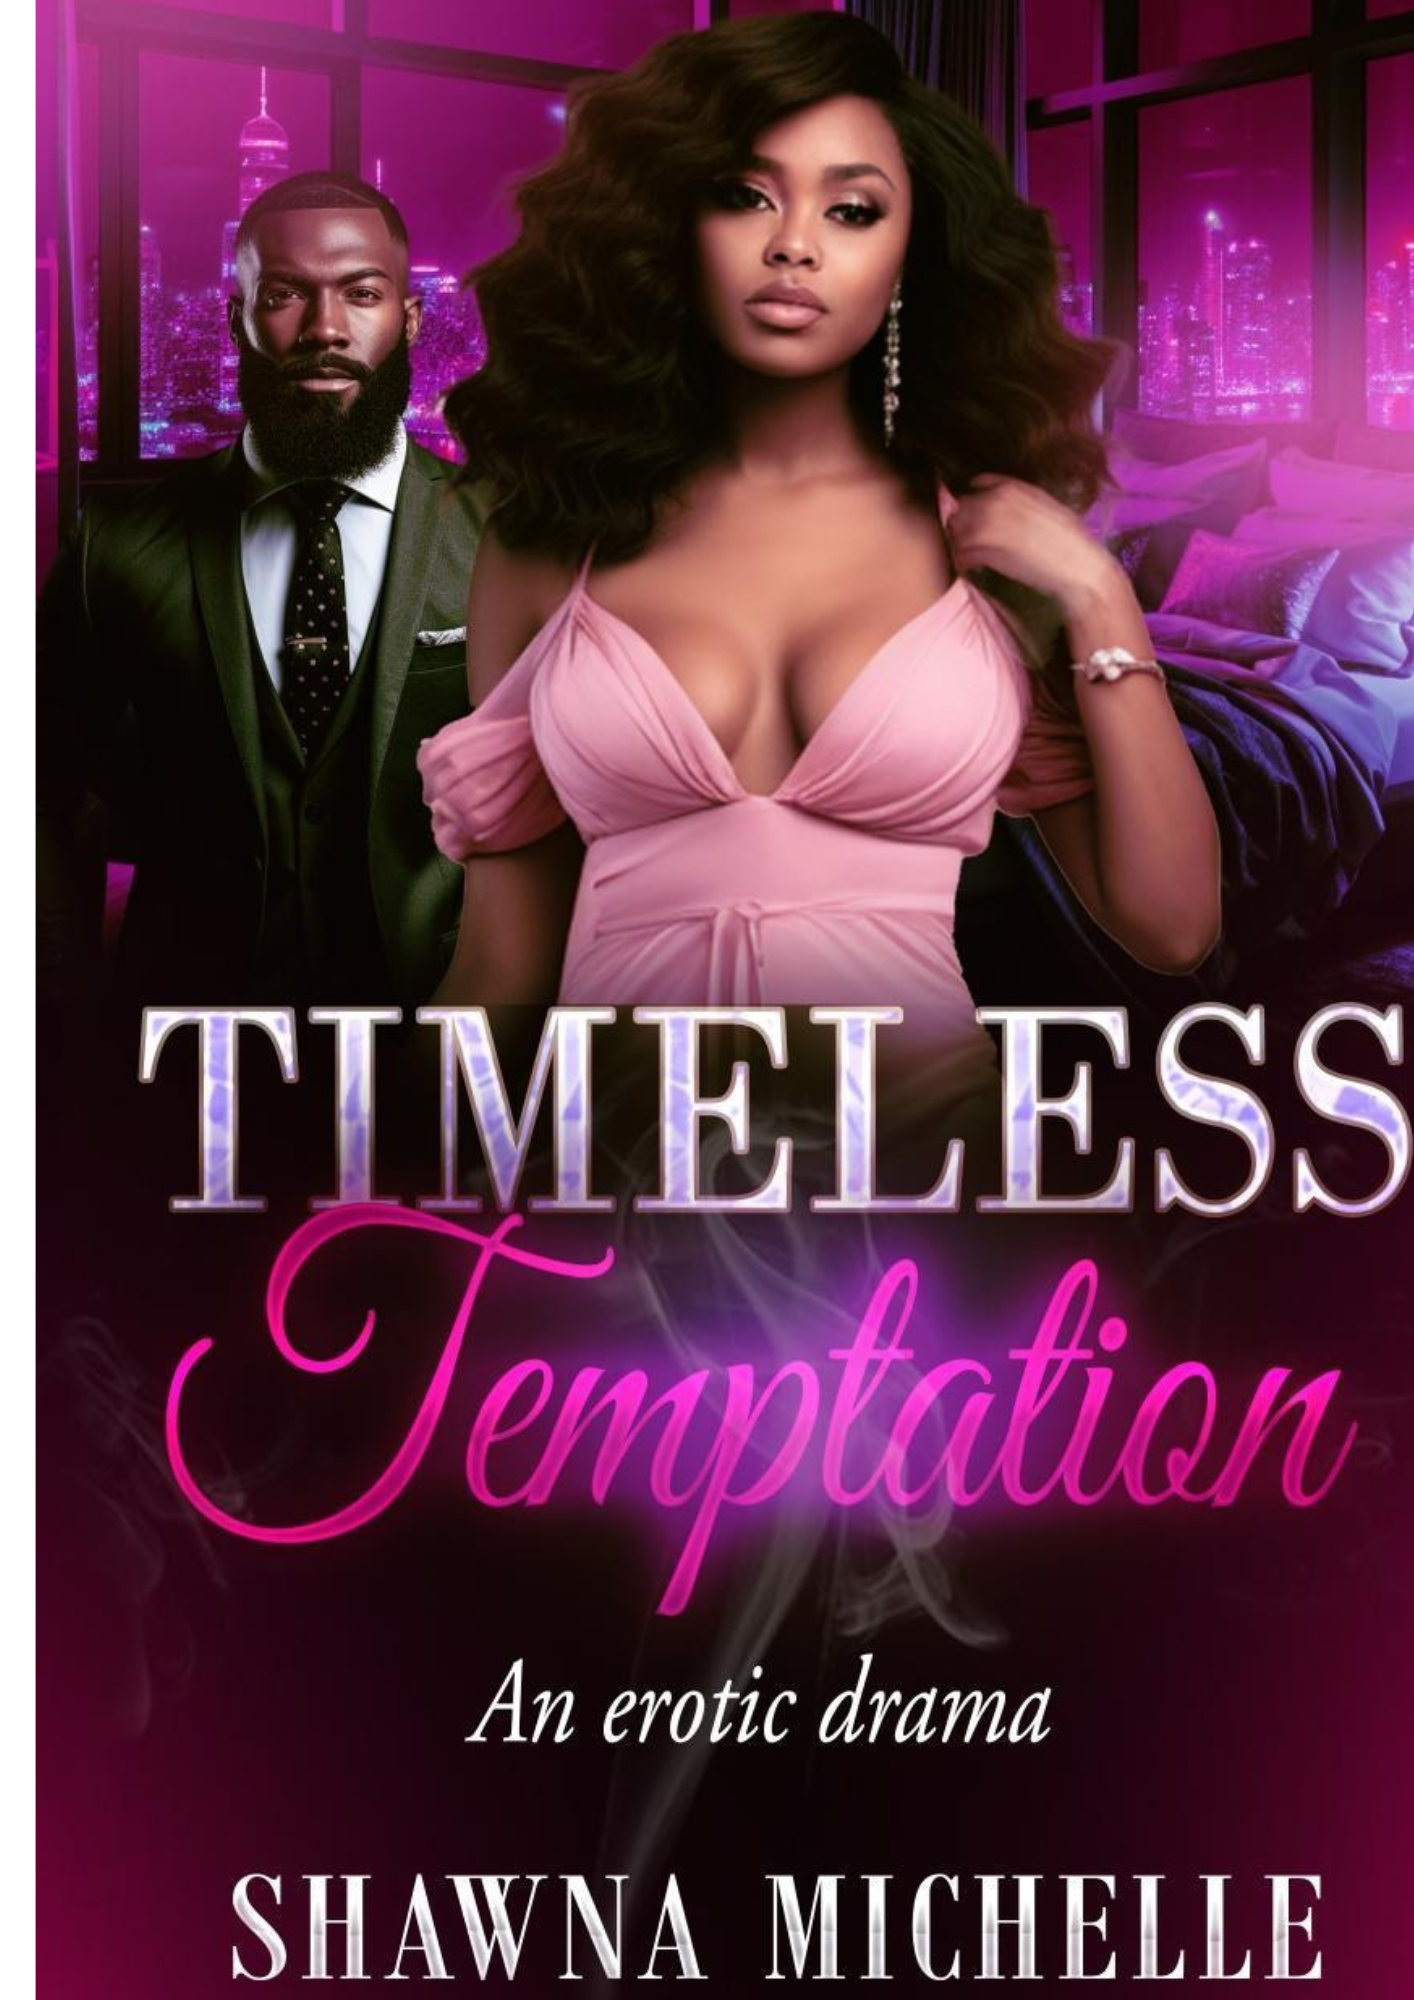 TIMELESS TEMPTATION AN EROTIC DRAMA BY SHAWNA MICHELLE